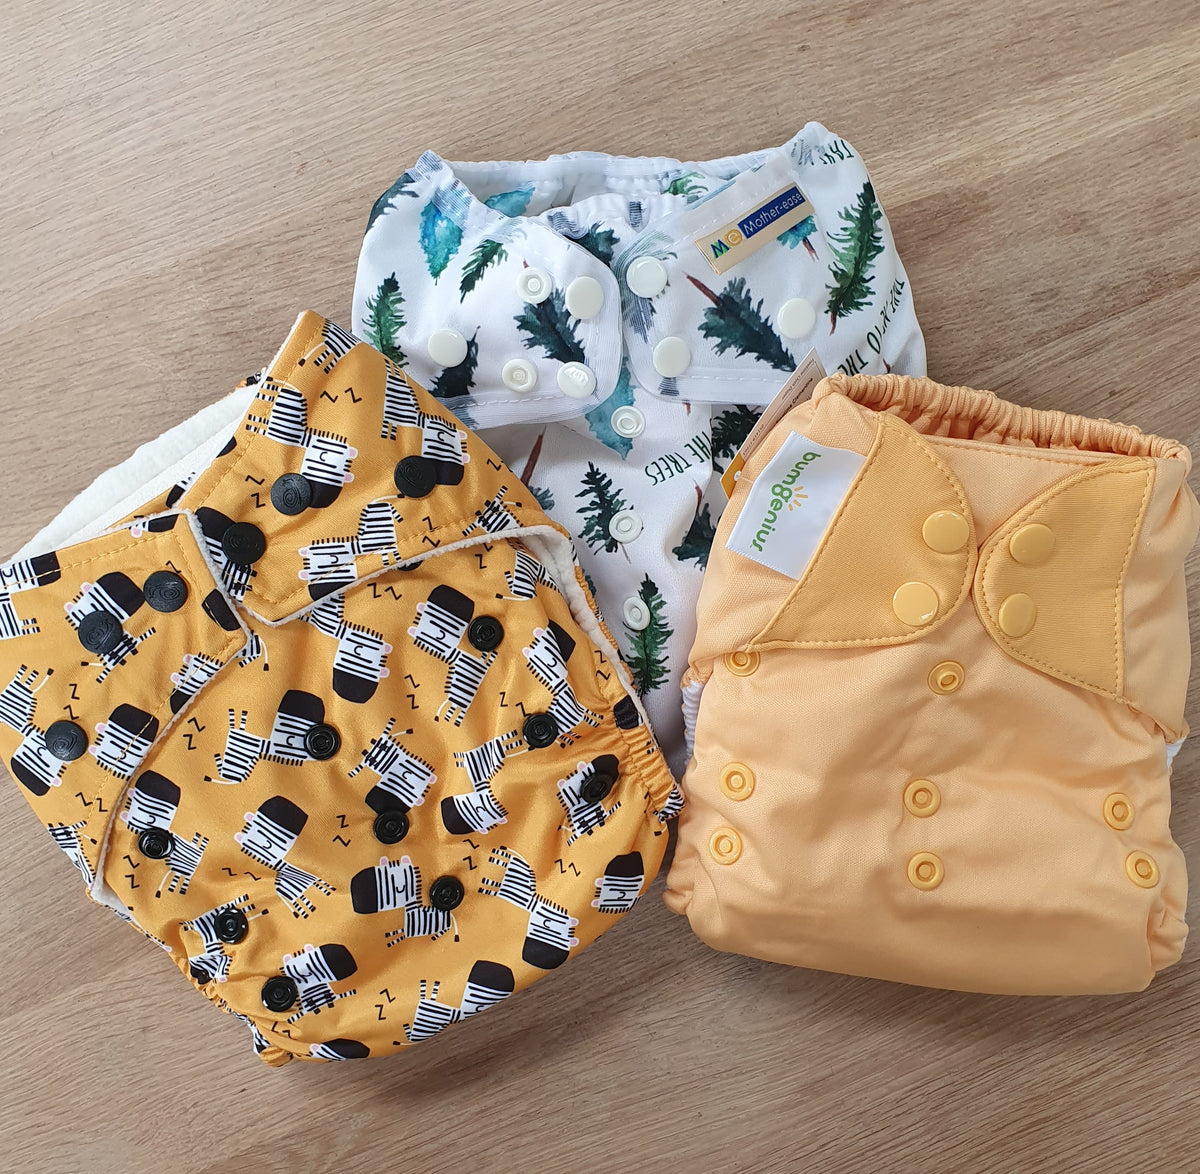 Wizard UNO reusable nappy by Motherease (Staydry) – Lizzie's Real Nappies